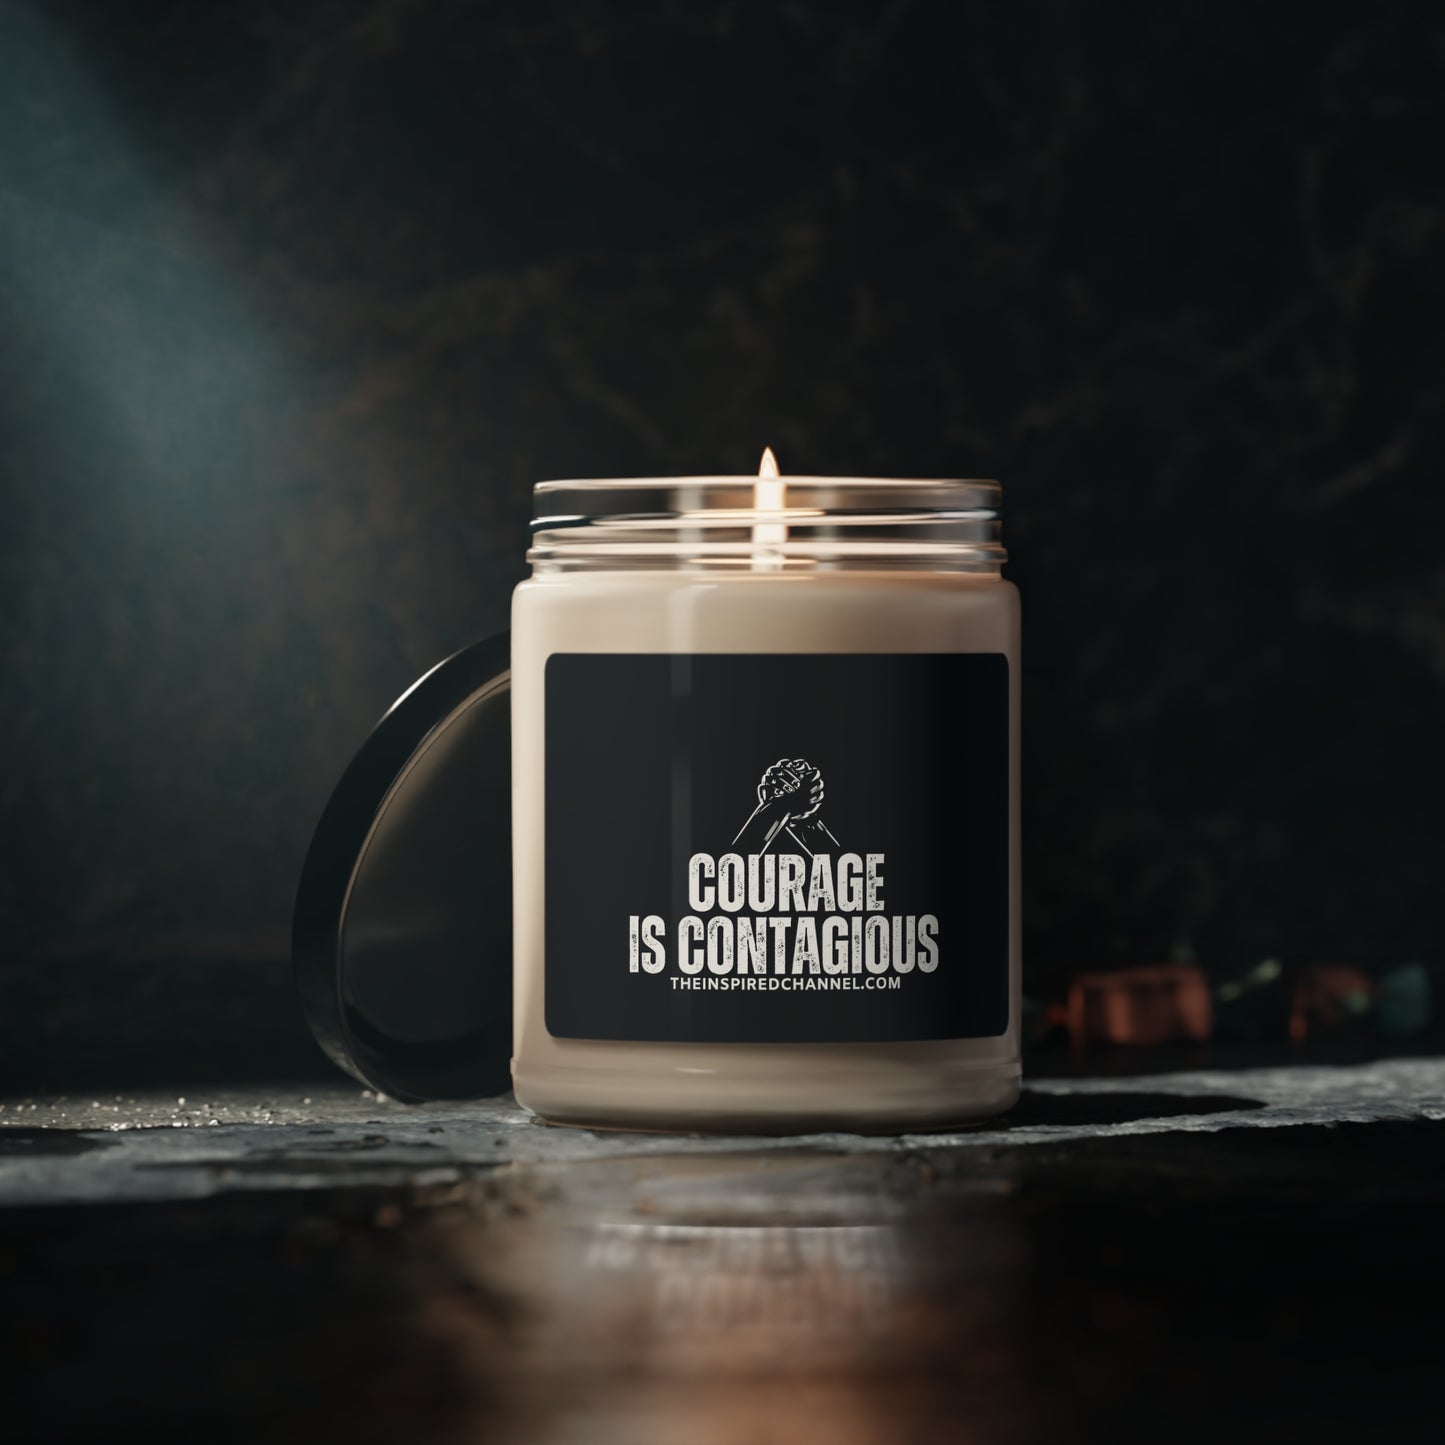 INSPIRED Courage Is Contagious Scented Soy Candle, 9oz